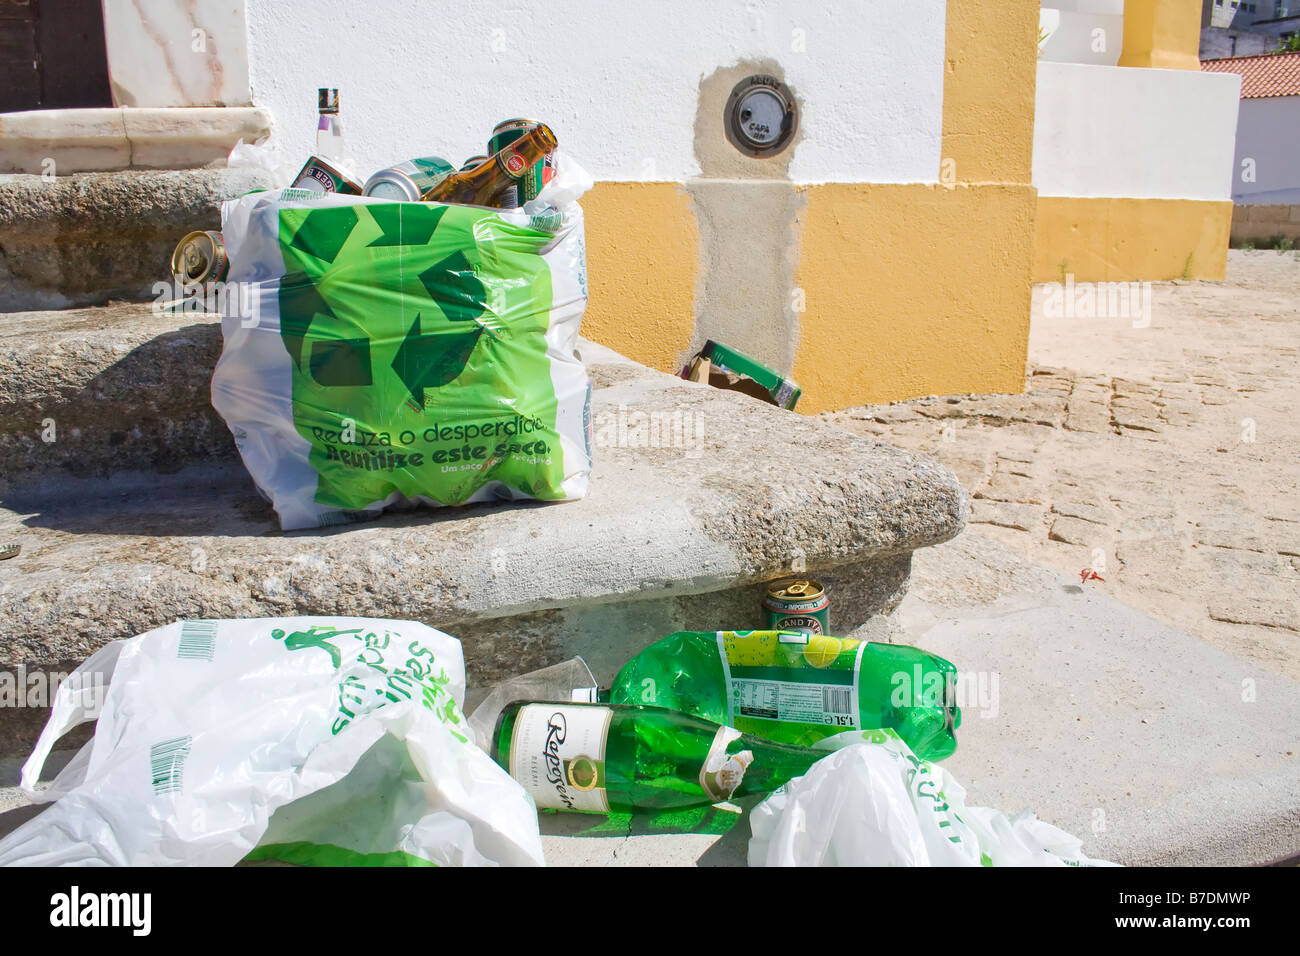 Ironic image, where plastic bags publicizing the recycling act end up filled with garbage, spread around in front of a monument. Stock Photo